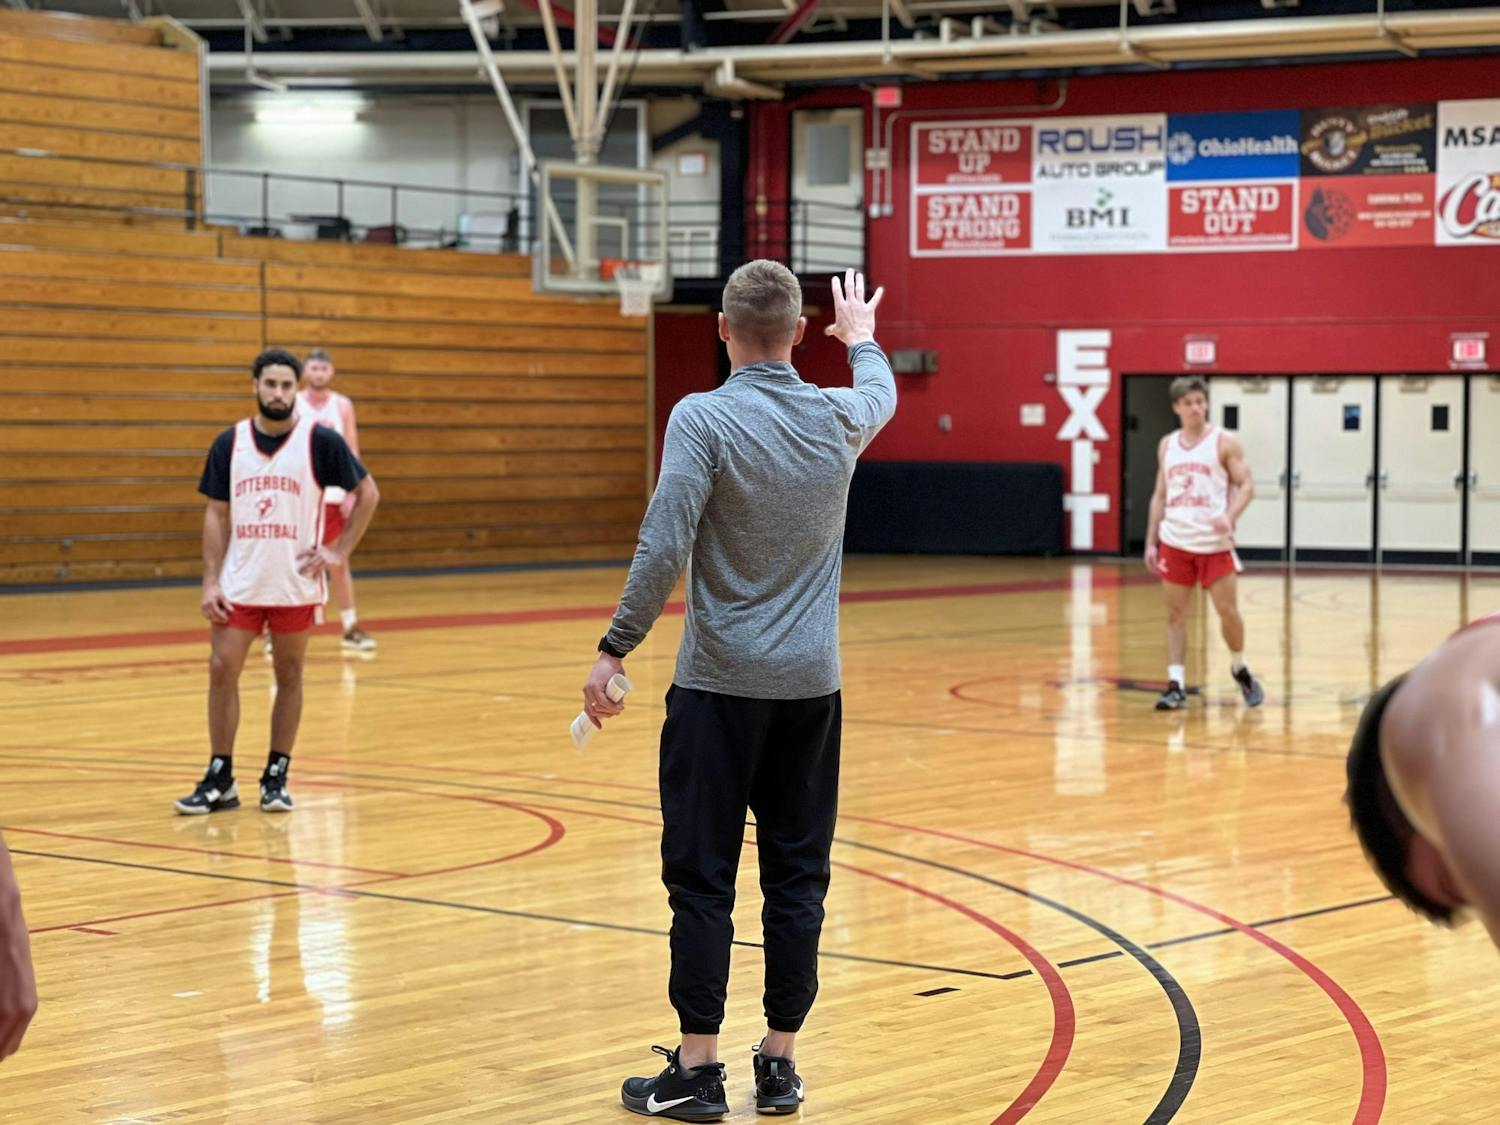 The head coach of the Otterbein men's basketball team directs three players in the distance.